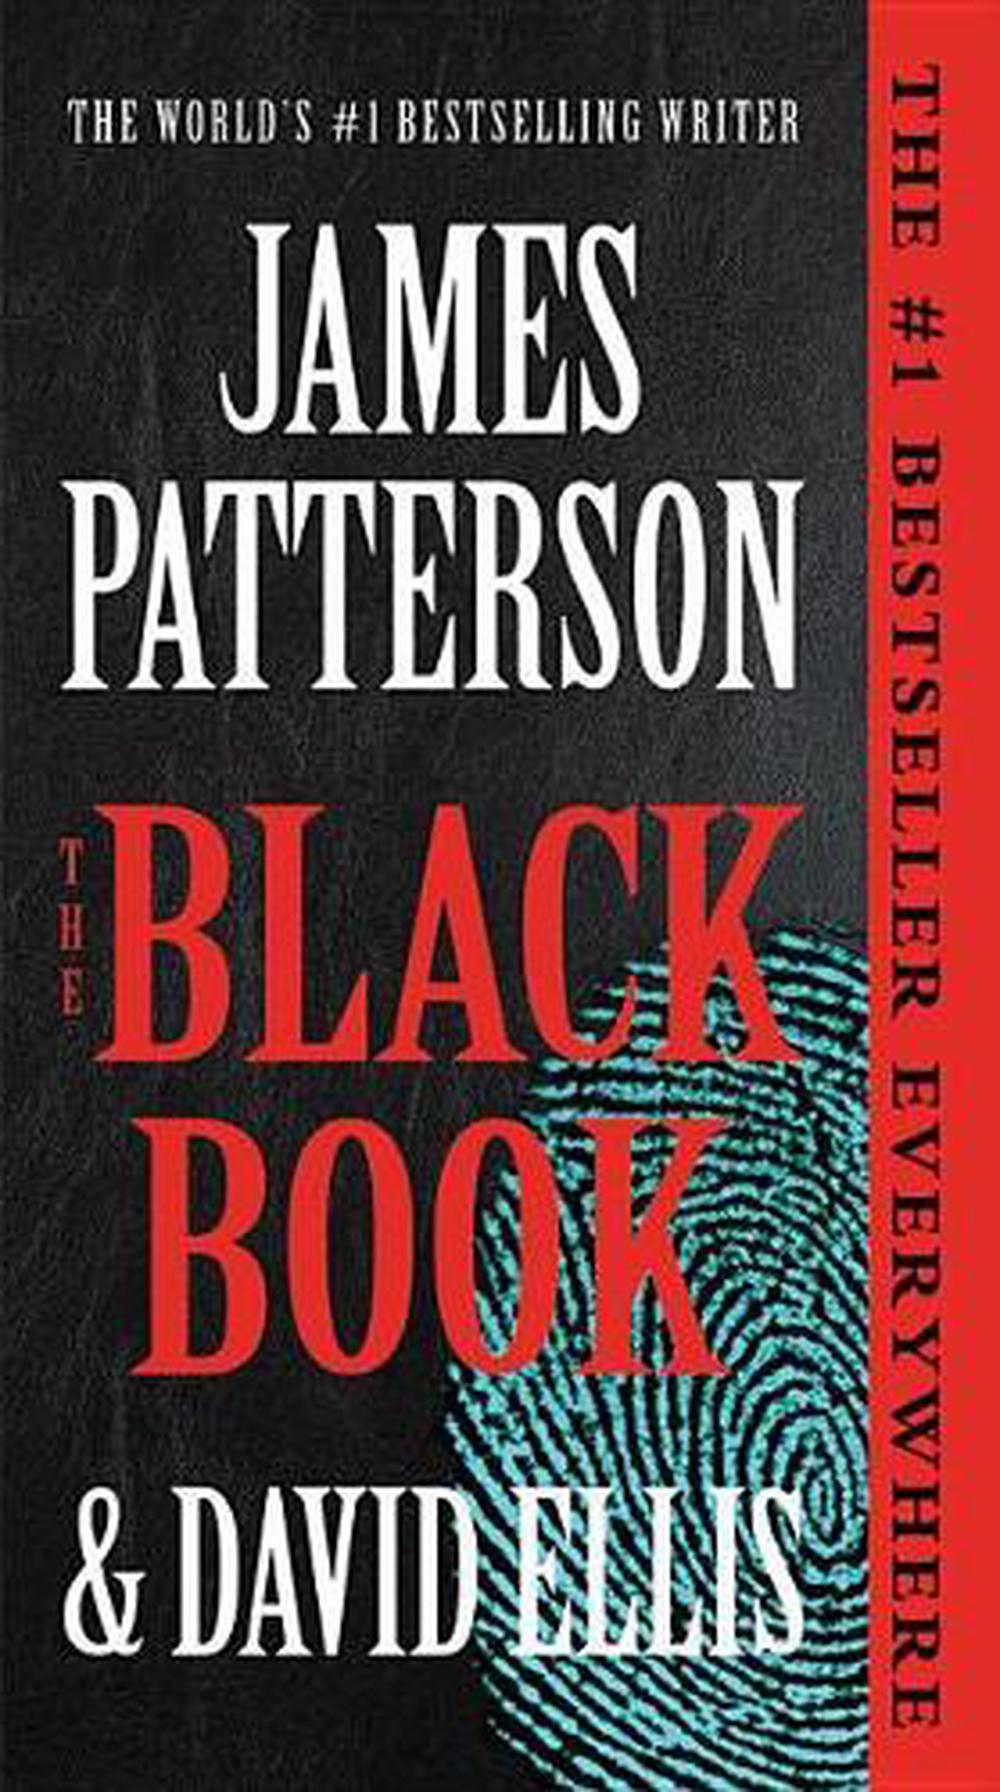 printable list of all james patterson books